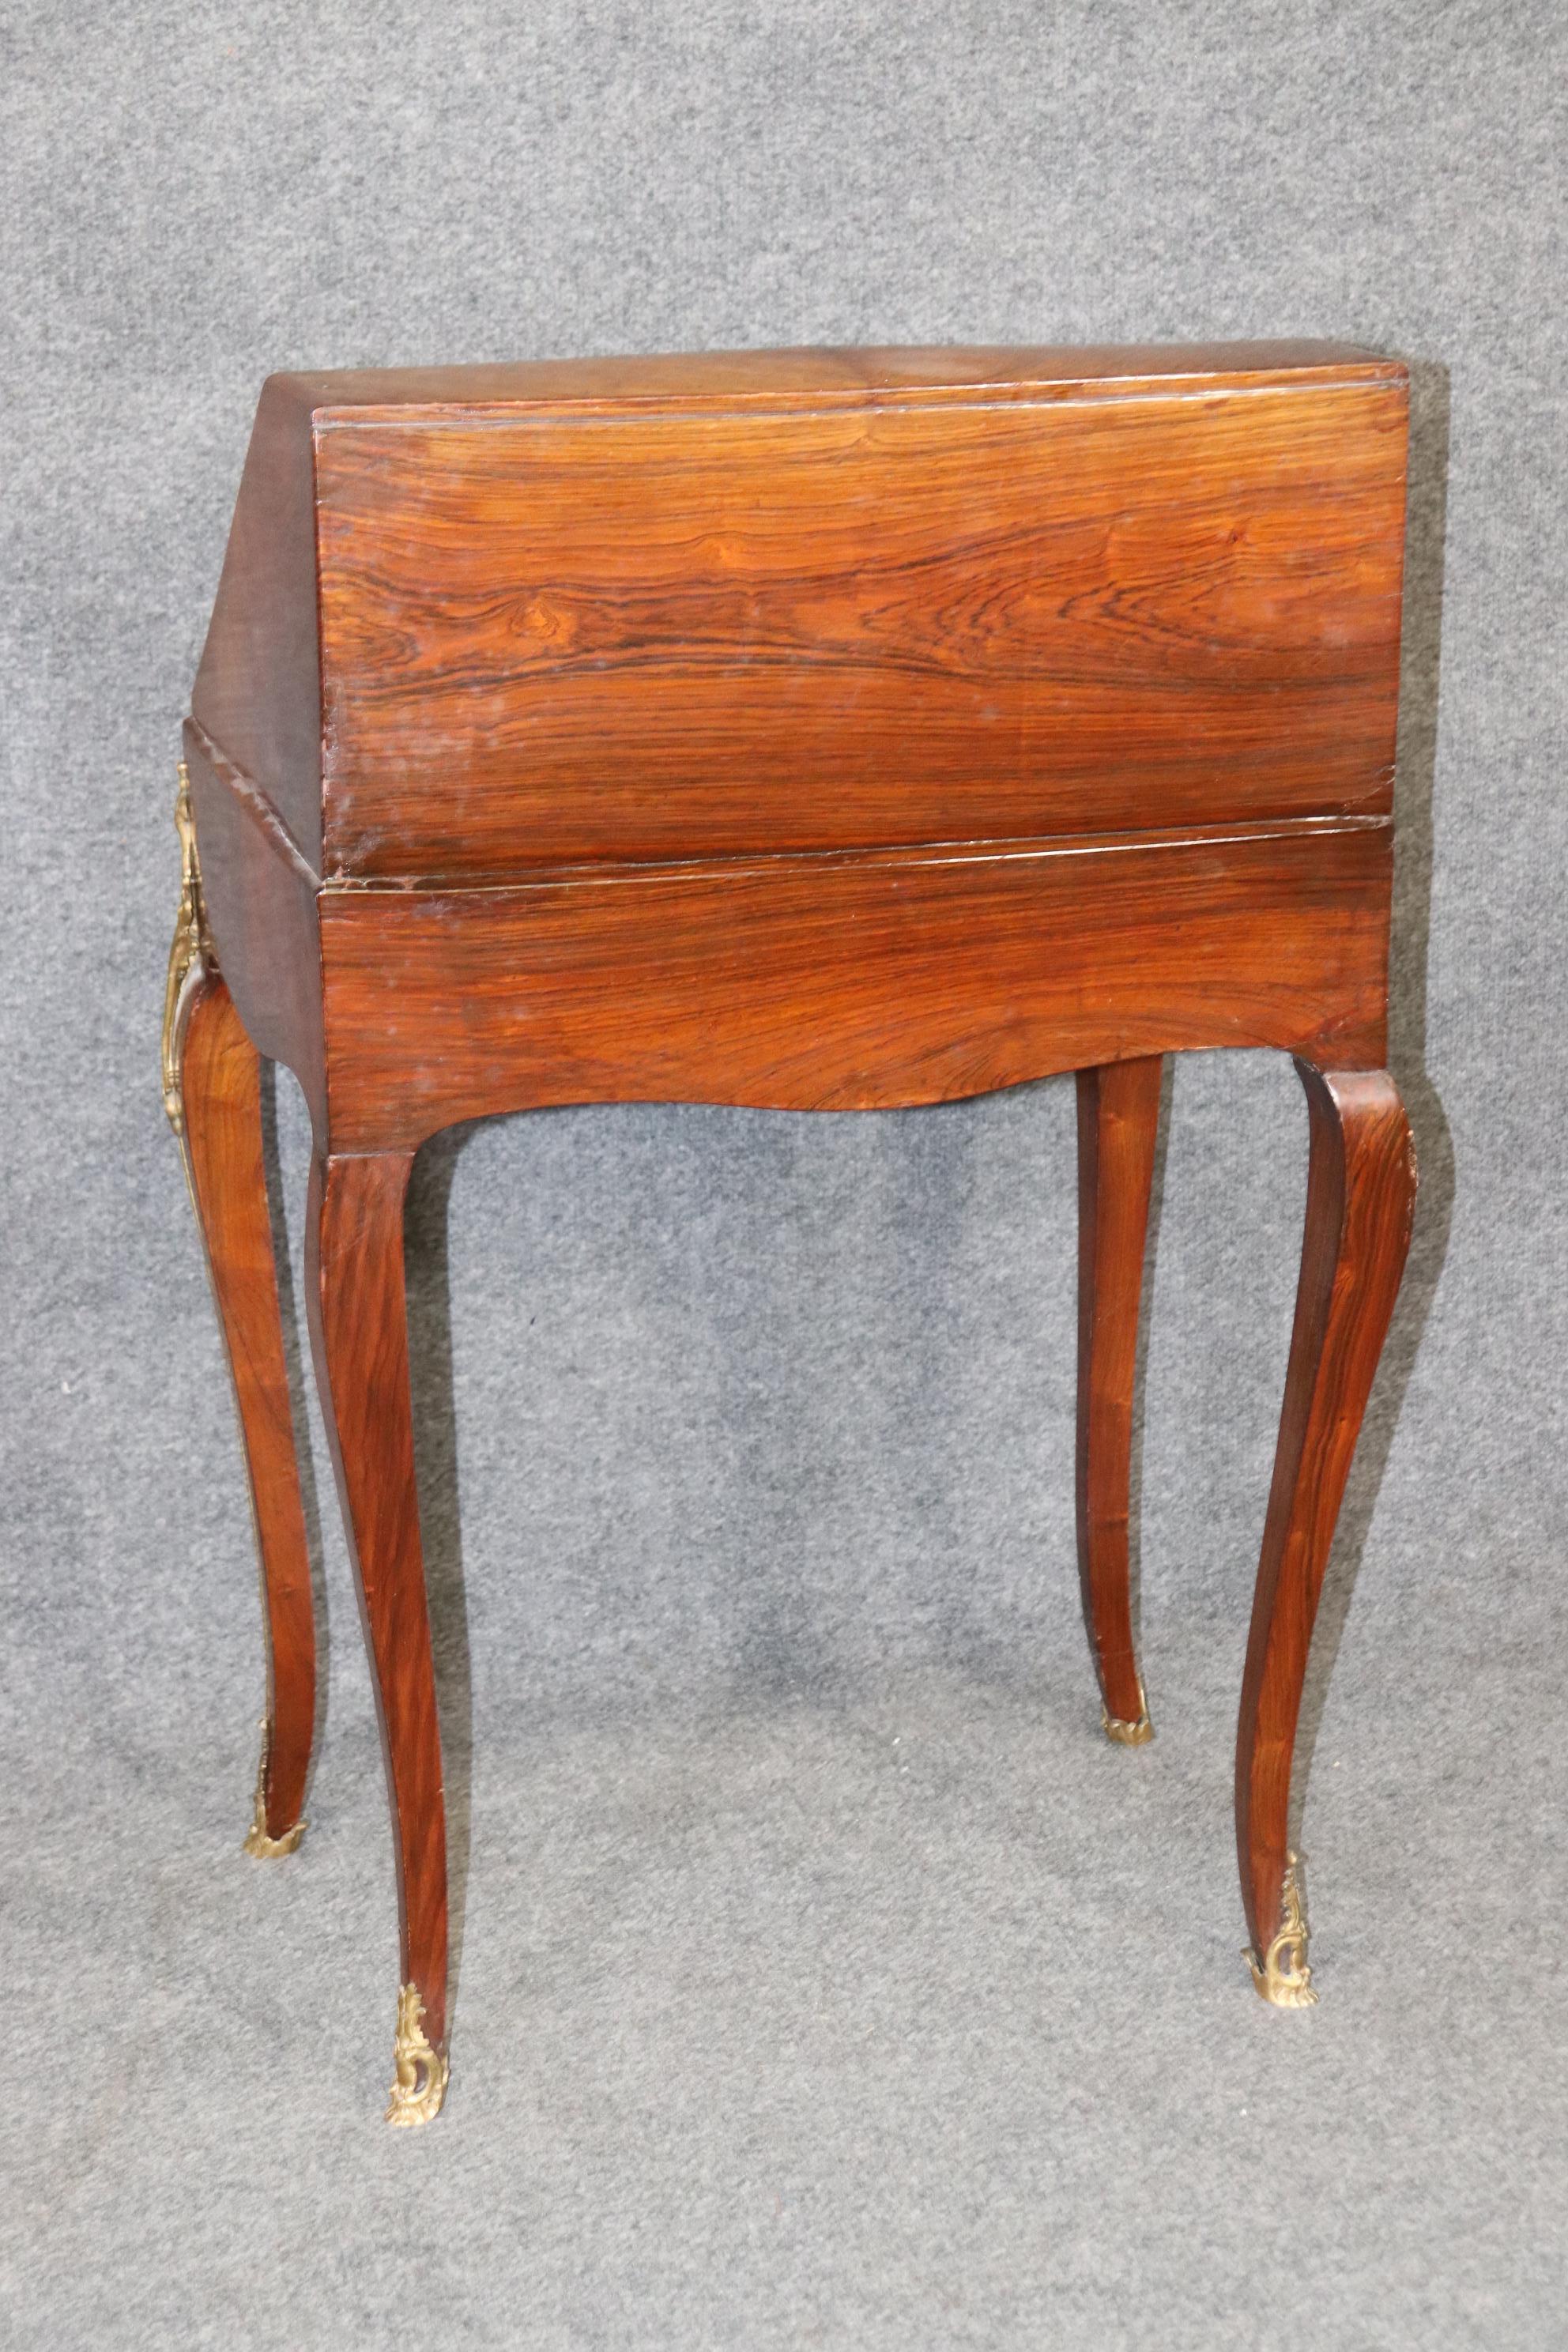 Fine Quality Francois Linke Style Bronze Mounted Petite Ladies Desk, 1870s In Good Condition For Sale In Swedesboro, NJ